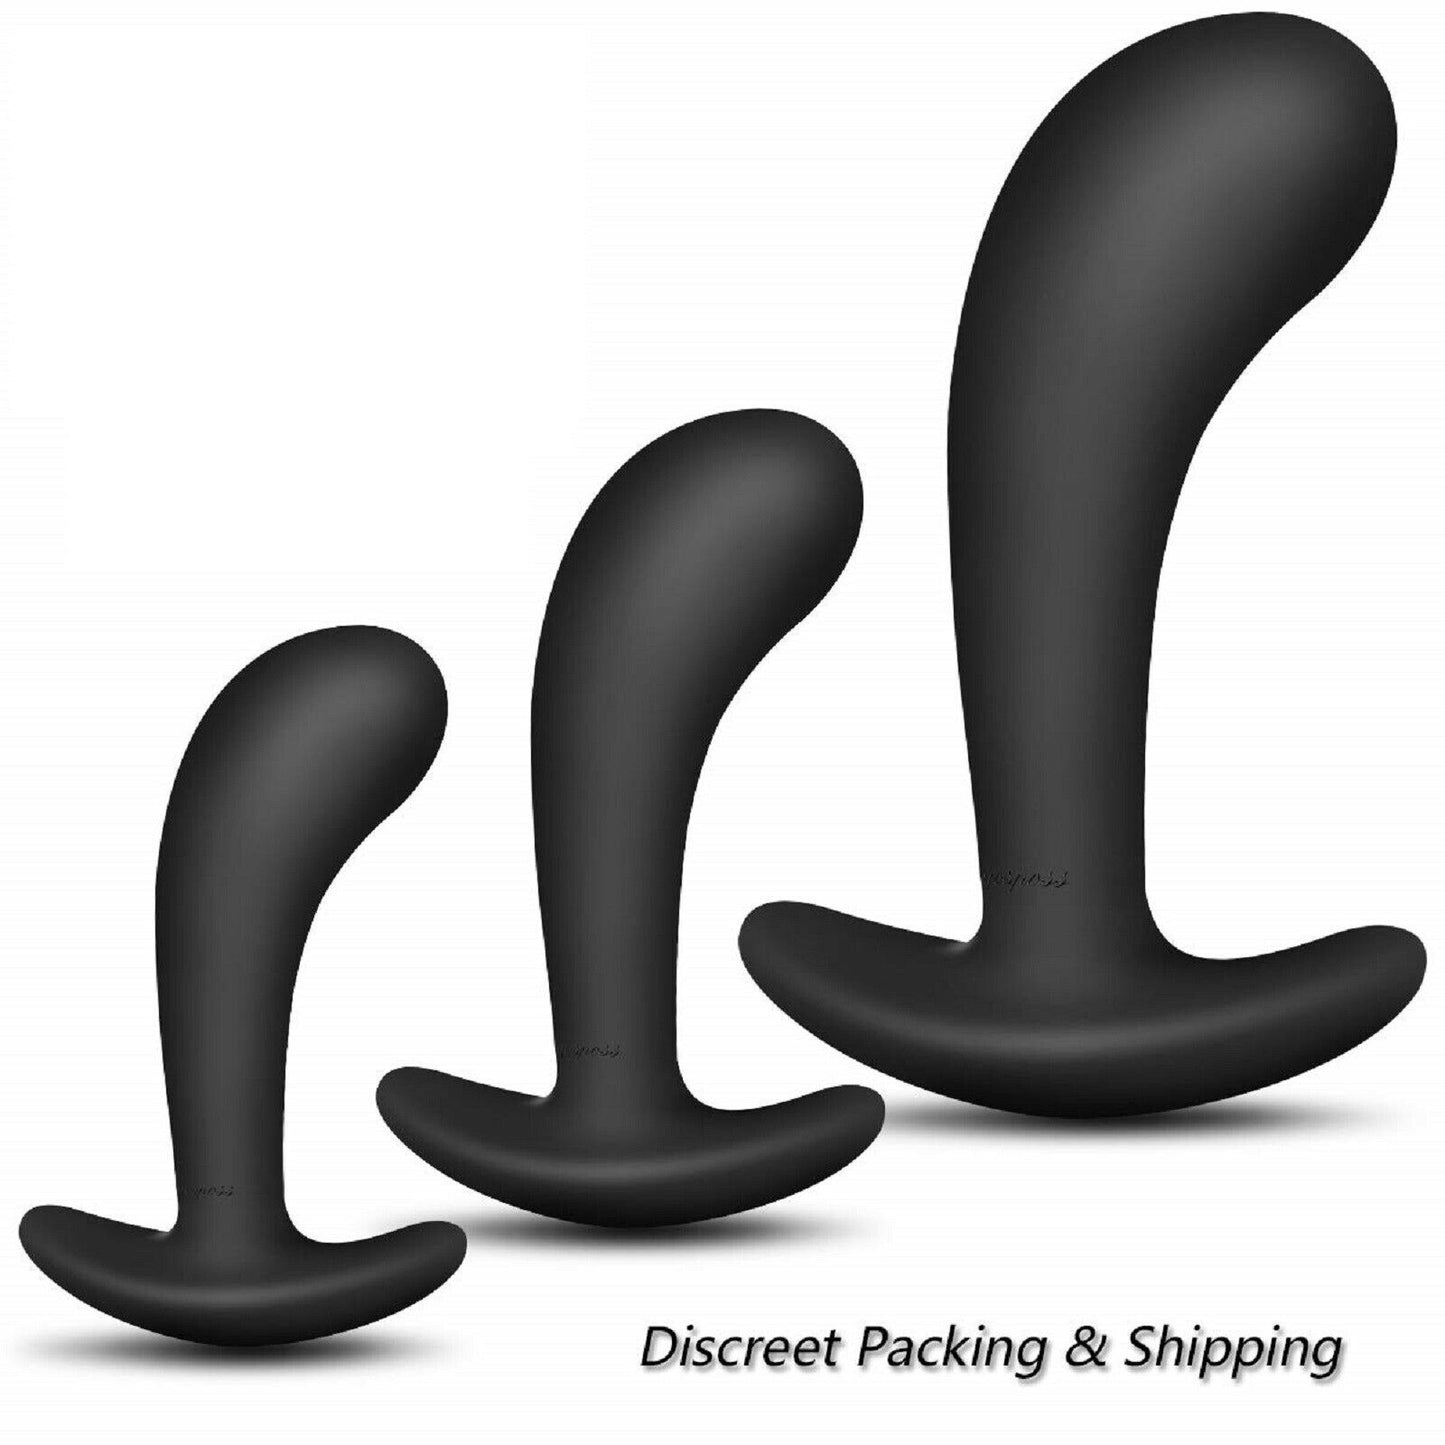 3 Pack Silicone Anal Butt Plug Beads Trainer Set Prostate Massager Dildo Sex Toy